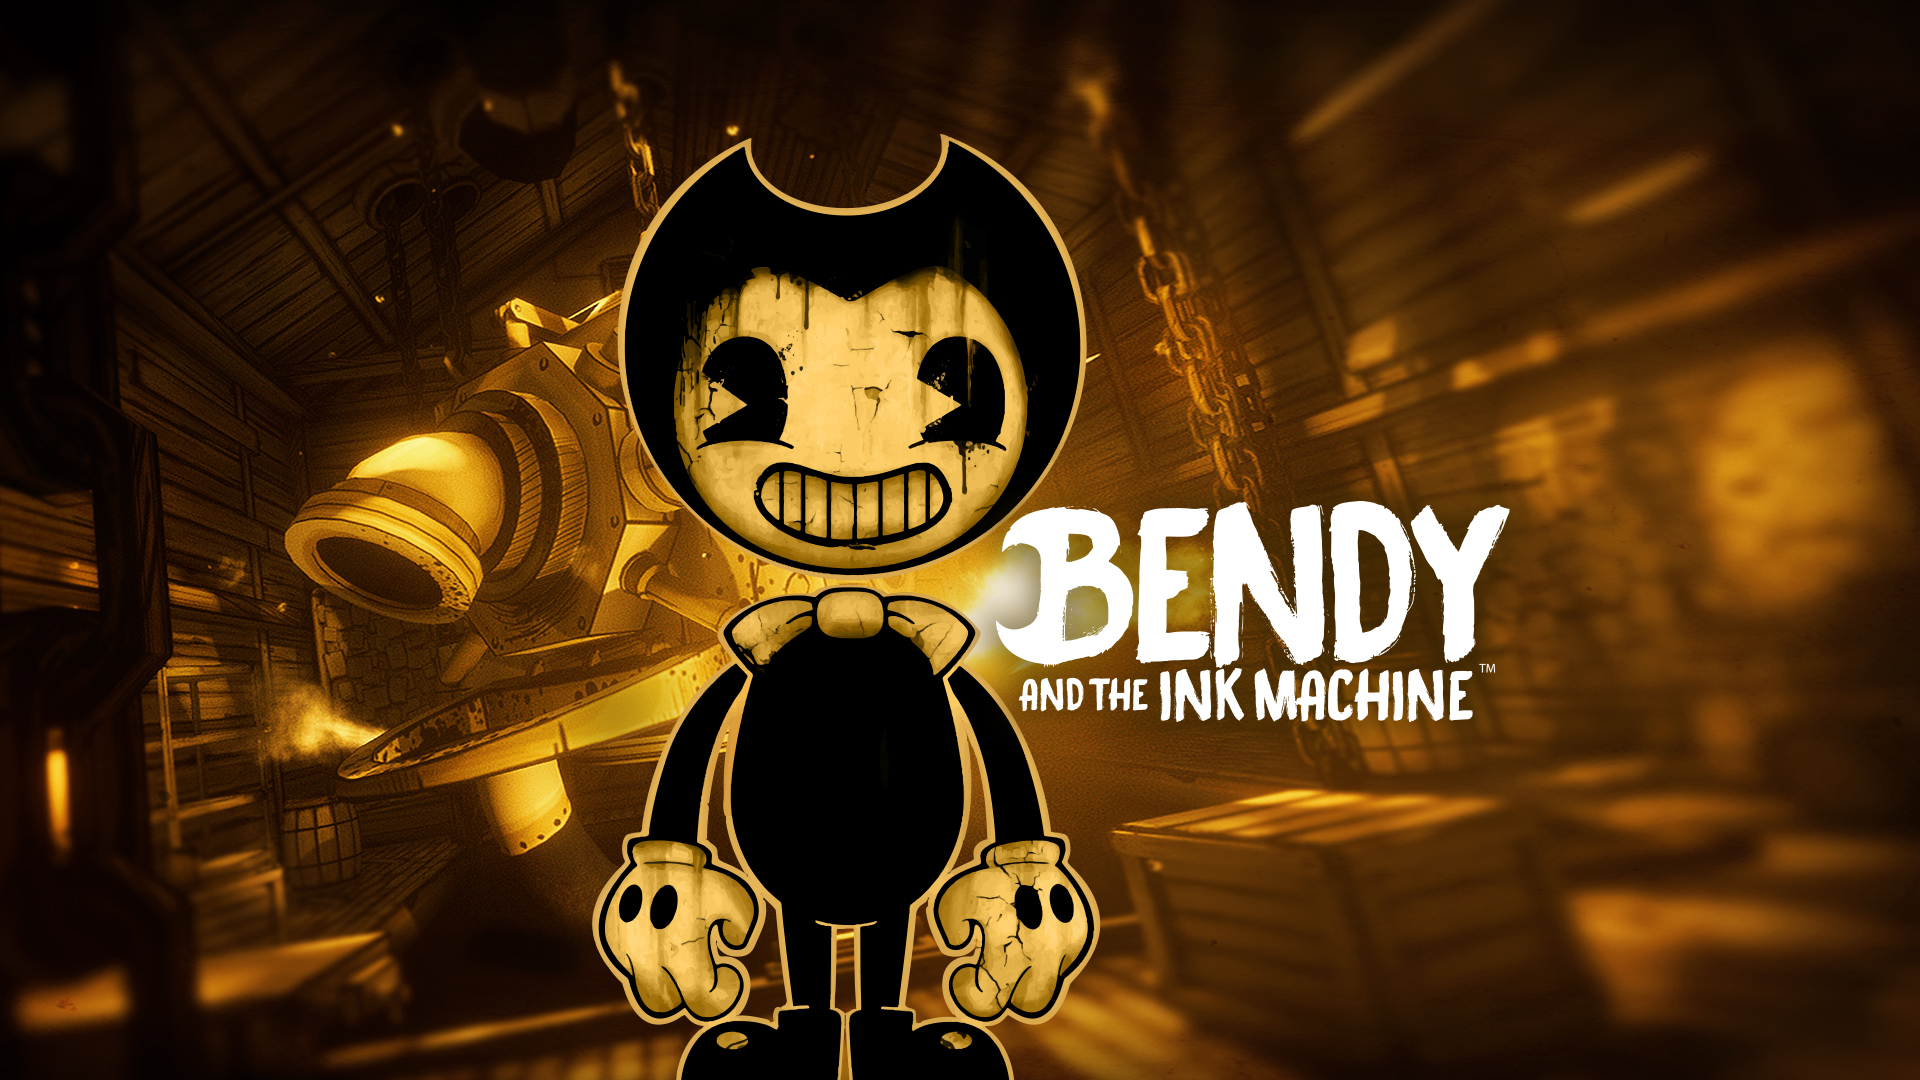 bendy-and-the-ink-machine-nintendo-switch-eshop-download